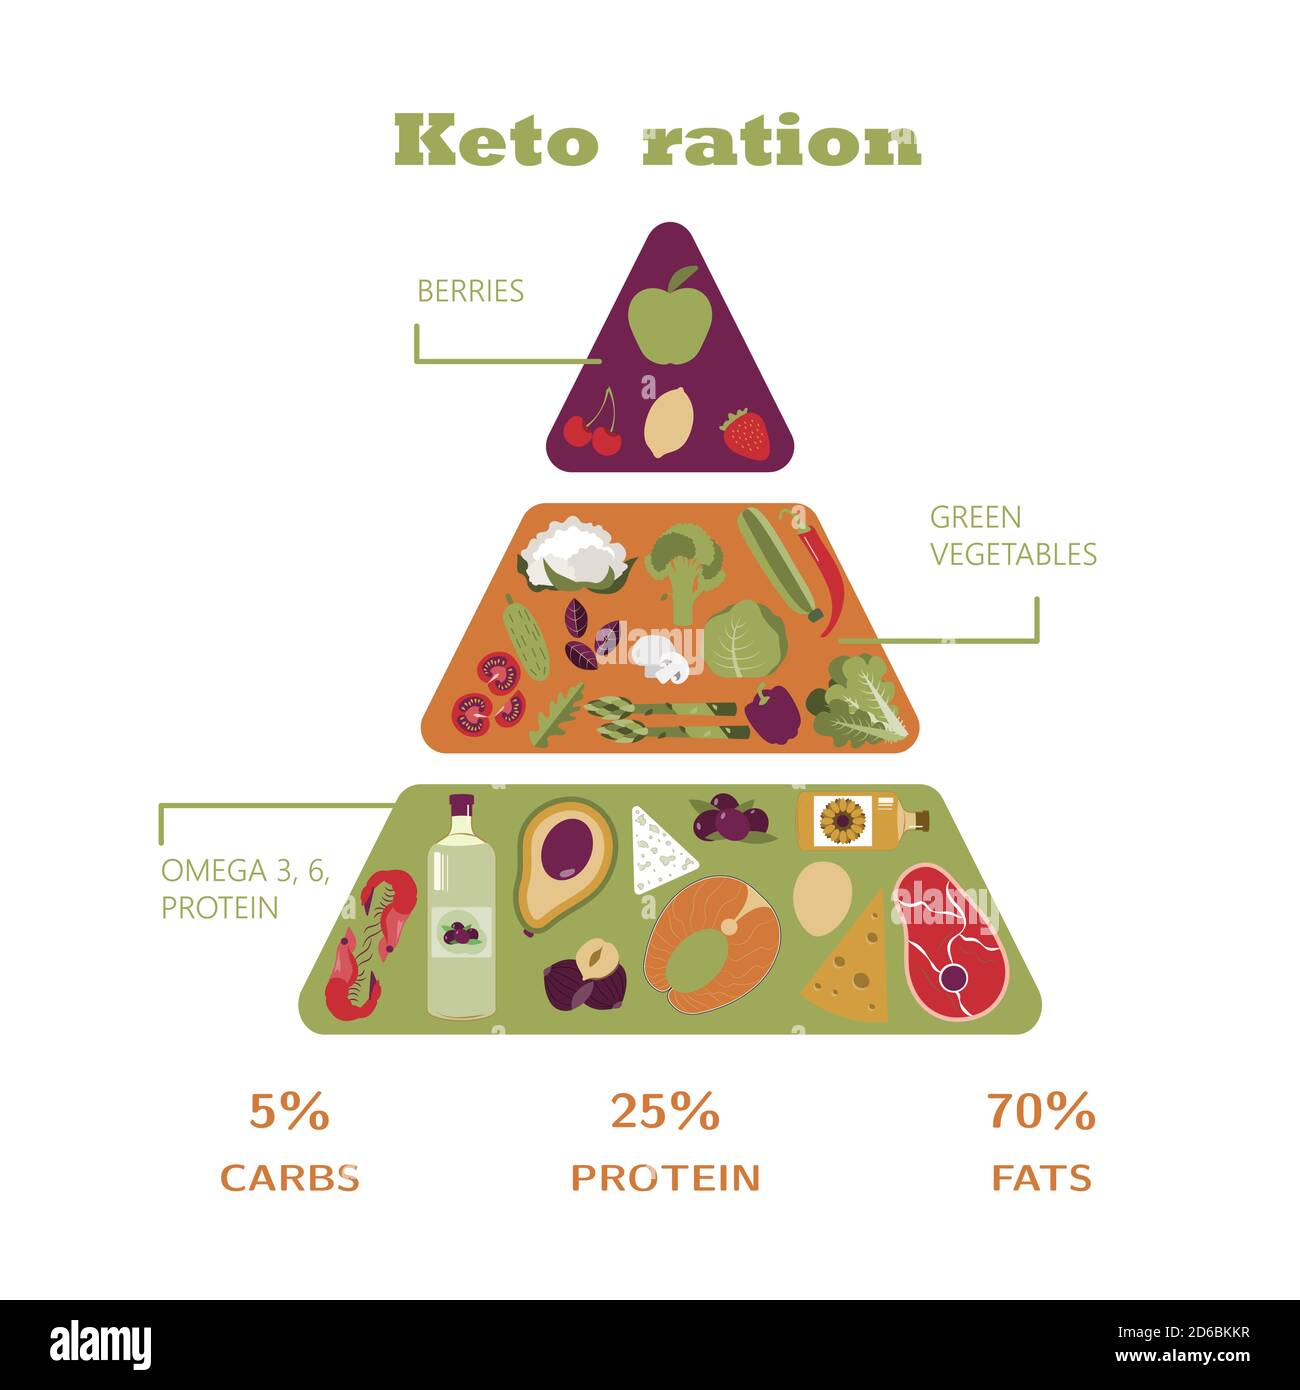 Pyramid of nutrition on the keto diet. Foods, calculation of water, beverages, fat, protein and carbohydrates for a healthy diet according to the keto diet. Infographics of healthy food. A brochure for familiarization with and compliance with the nutrition plan. Poster for advertising, poster or banner, for people who are losing weight. Stock Vector